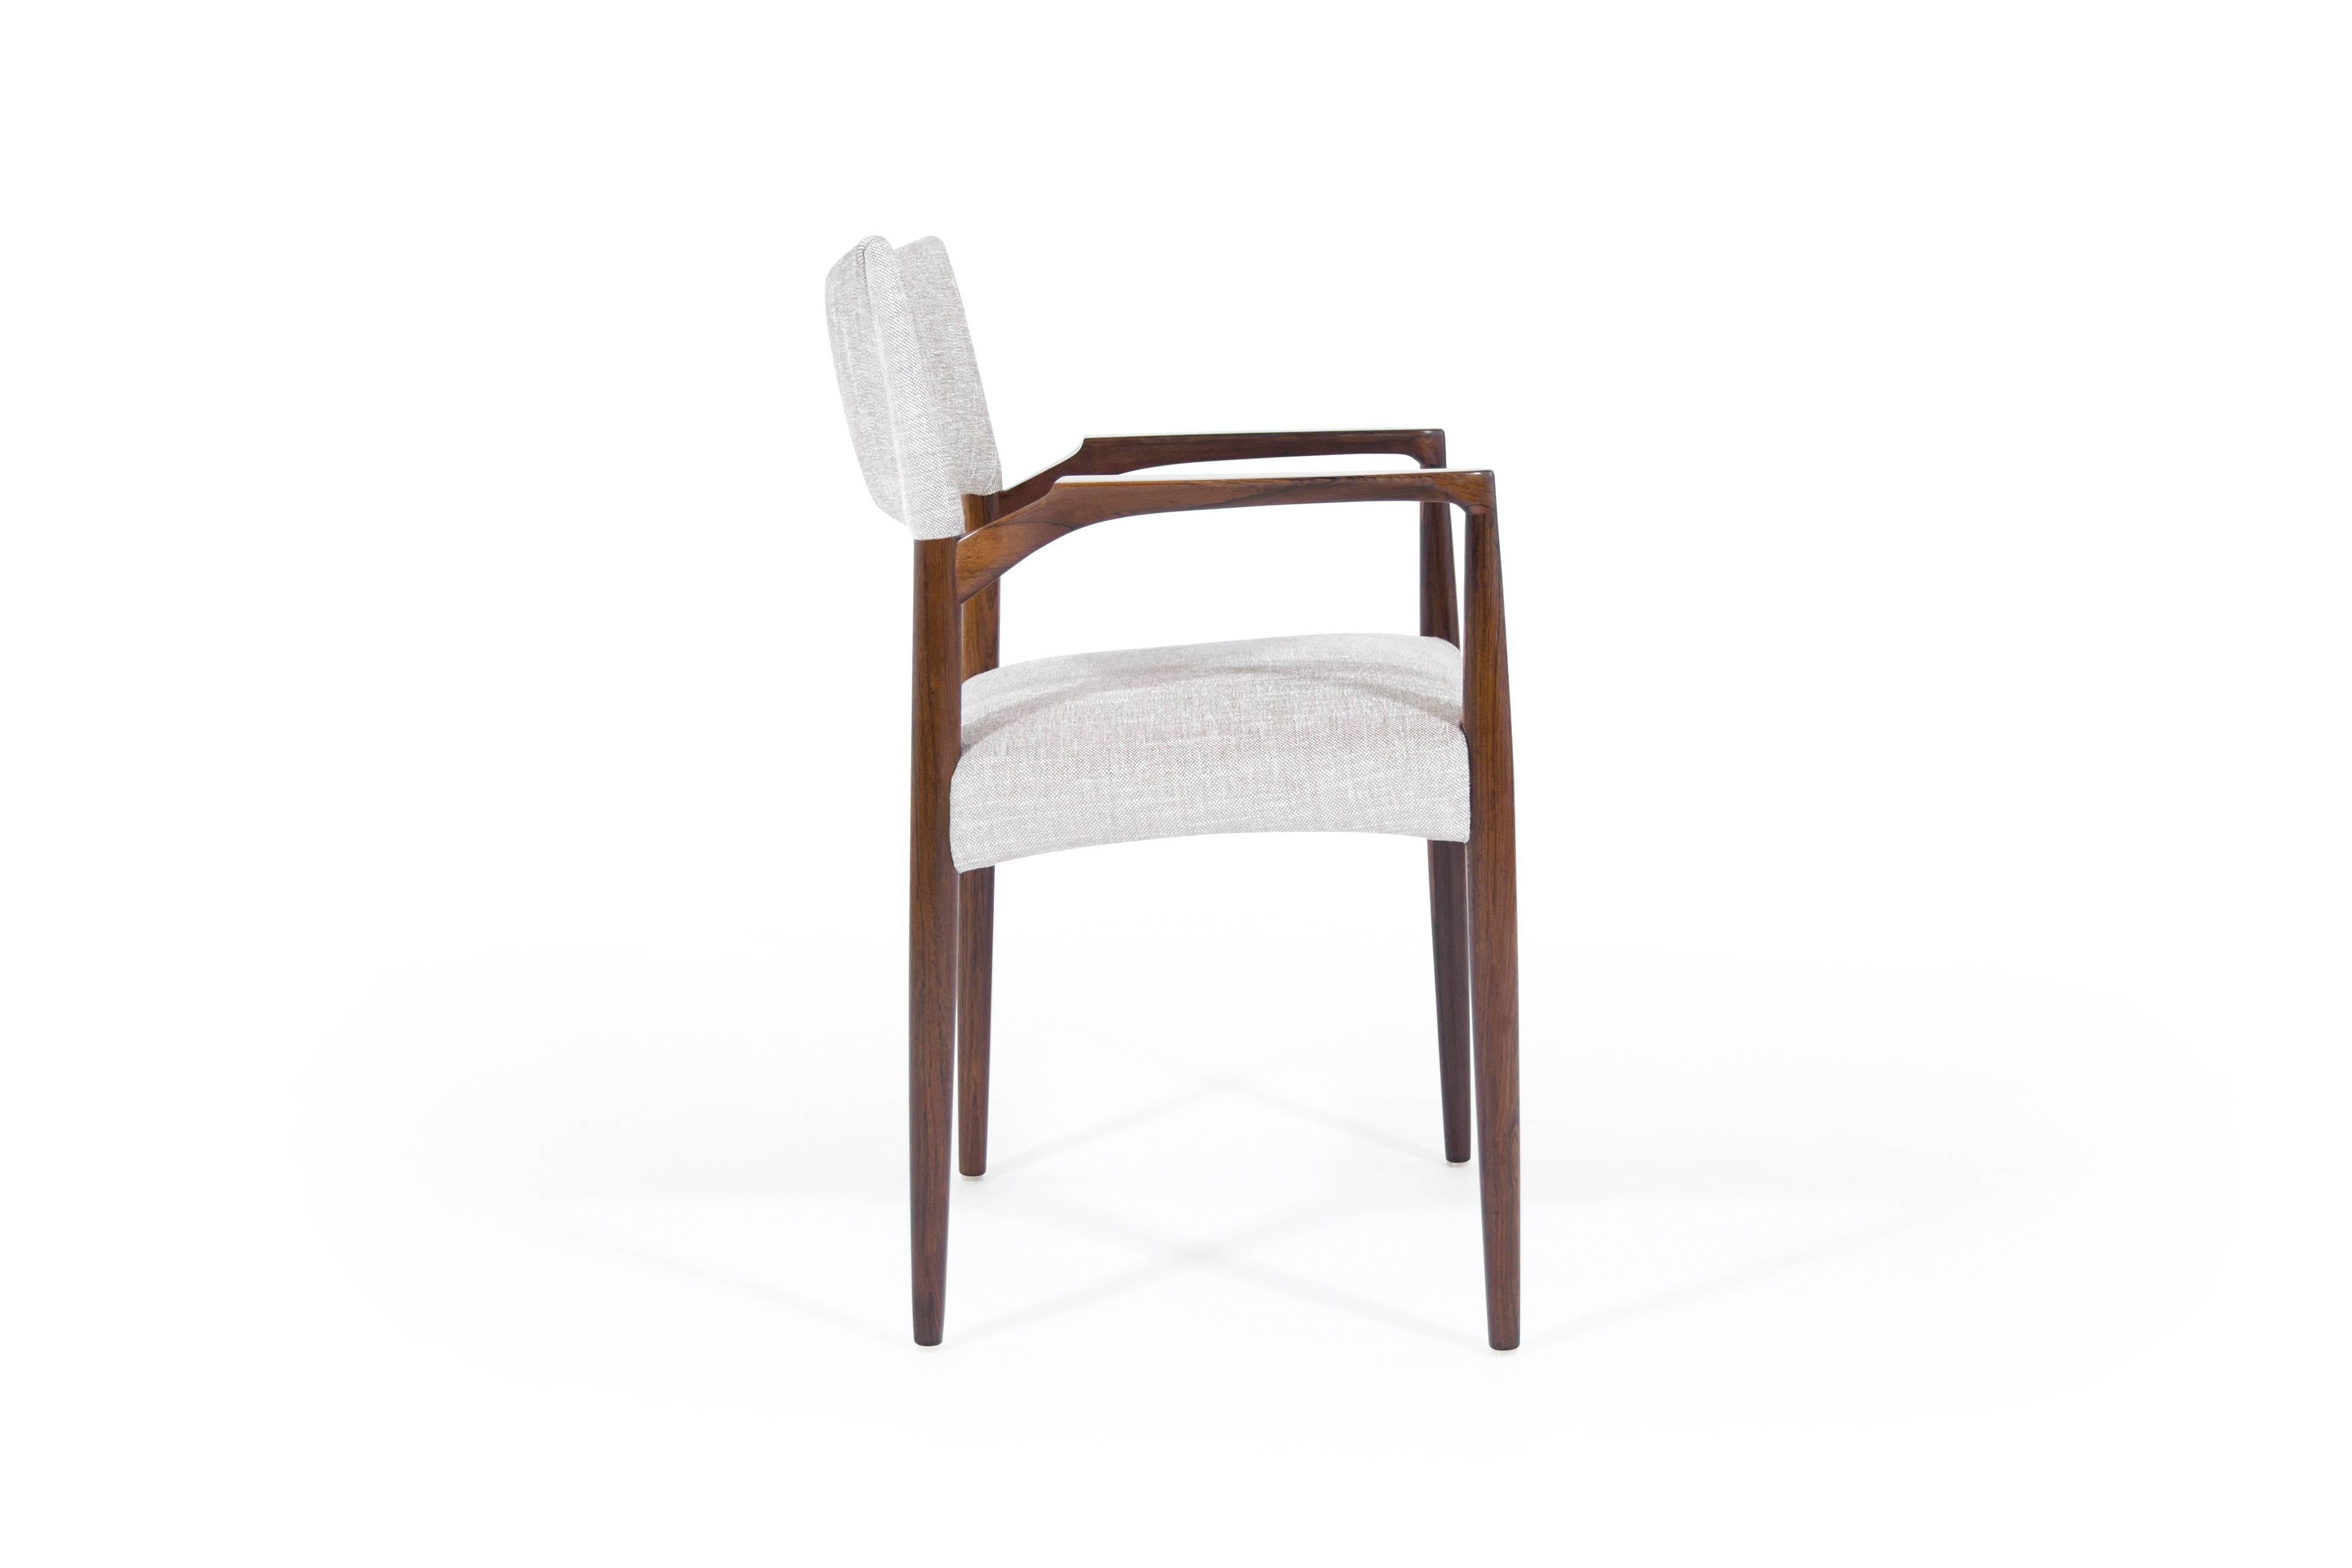 Rare rosewood armchair by Aksel Bender Madsen. Beautifully crafted, very comfortable and supportive. Newly upholstered in beige linen. Fully restored rosewood has beautiful hues and good clear grain throughout.